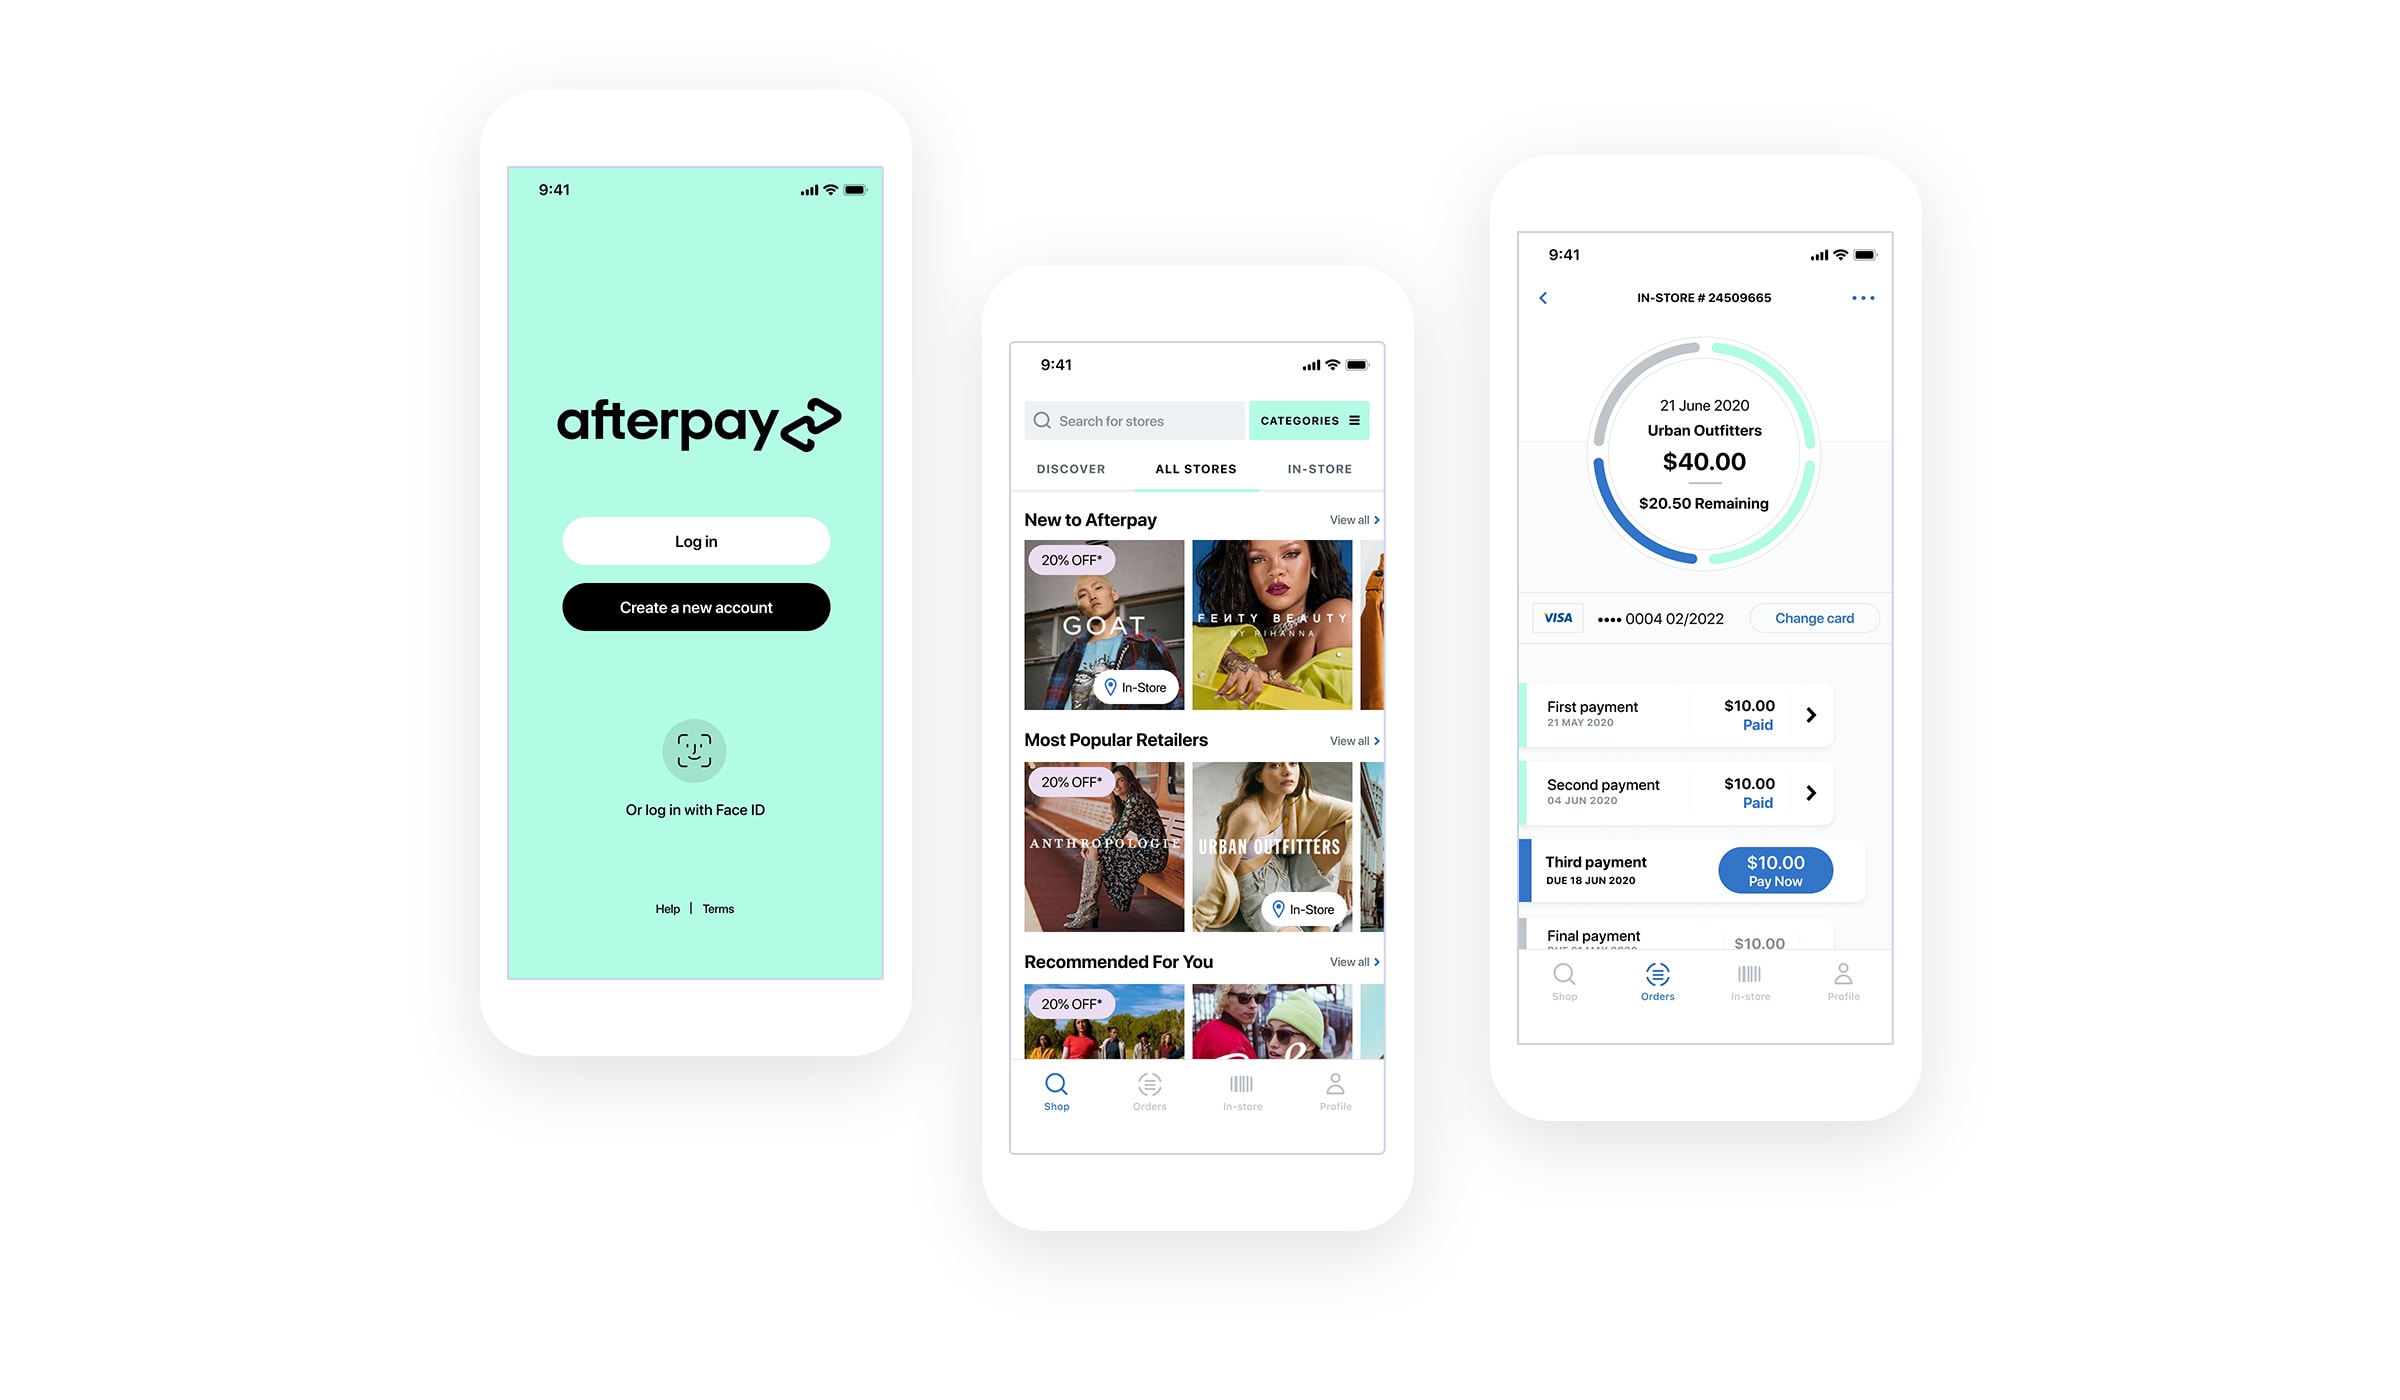 Afterpay connects merchants with the world's best shoppers. And no application fees mean more businesses sign up with Afterpay than any other payment service.